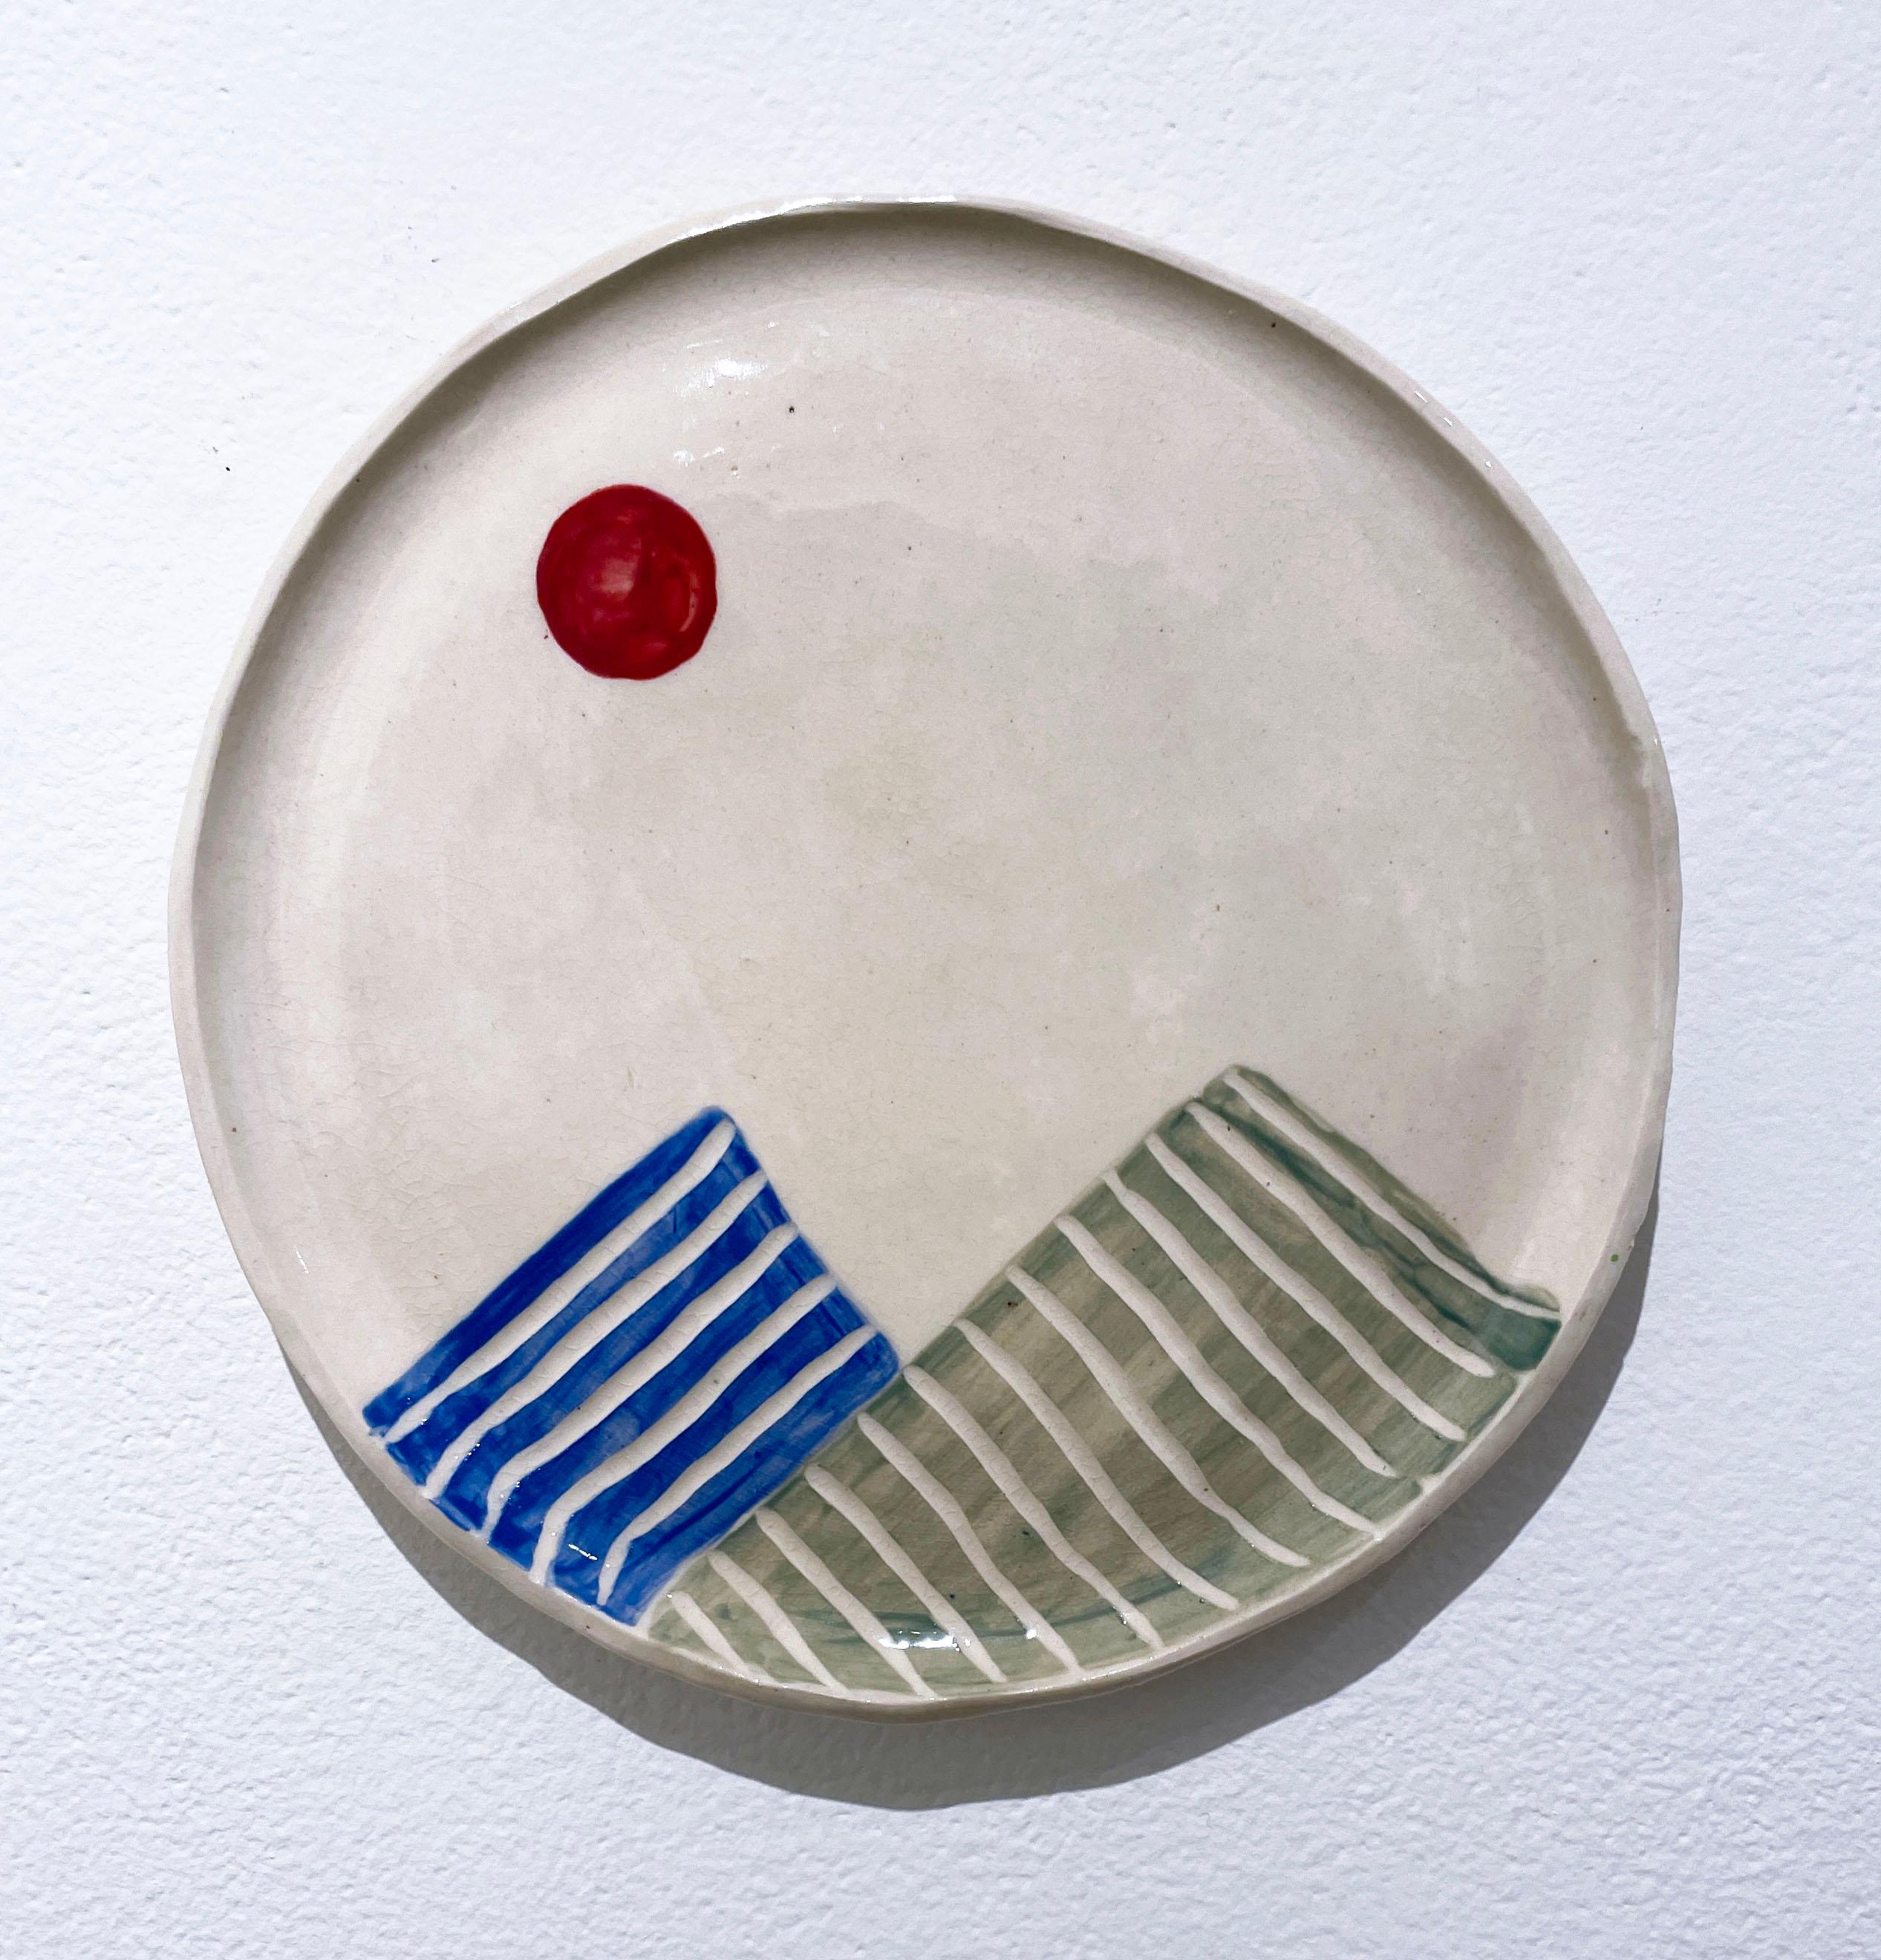 Mountain Range, 2019, glazed ceramic plate, landscape, sun, mountains, abstract landscape, red sun, blue and green mountains, stripes, earthtones

Delightful glaze work and ceramic plate by Molly Craig, 2019.  Made with glazed ceramic.  Mountain